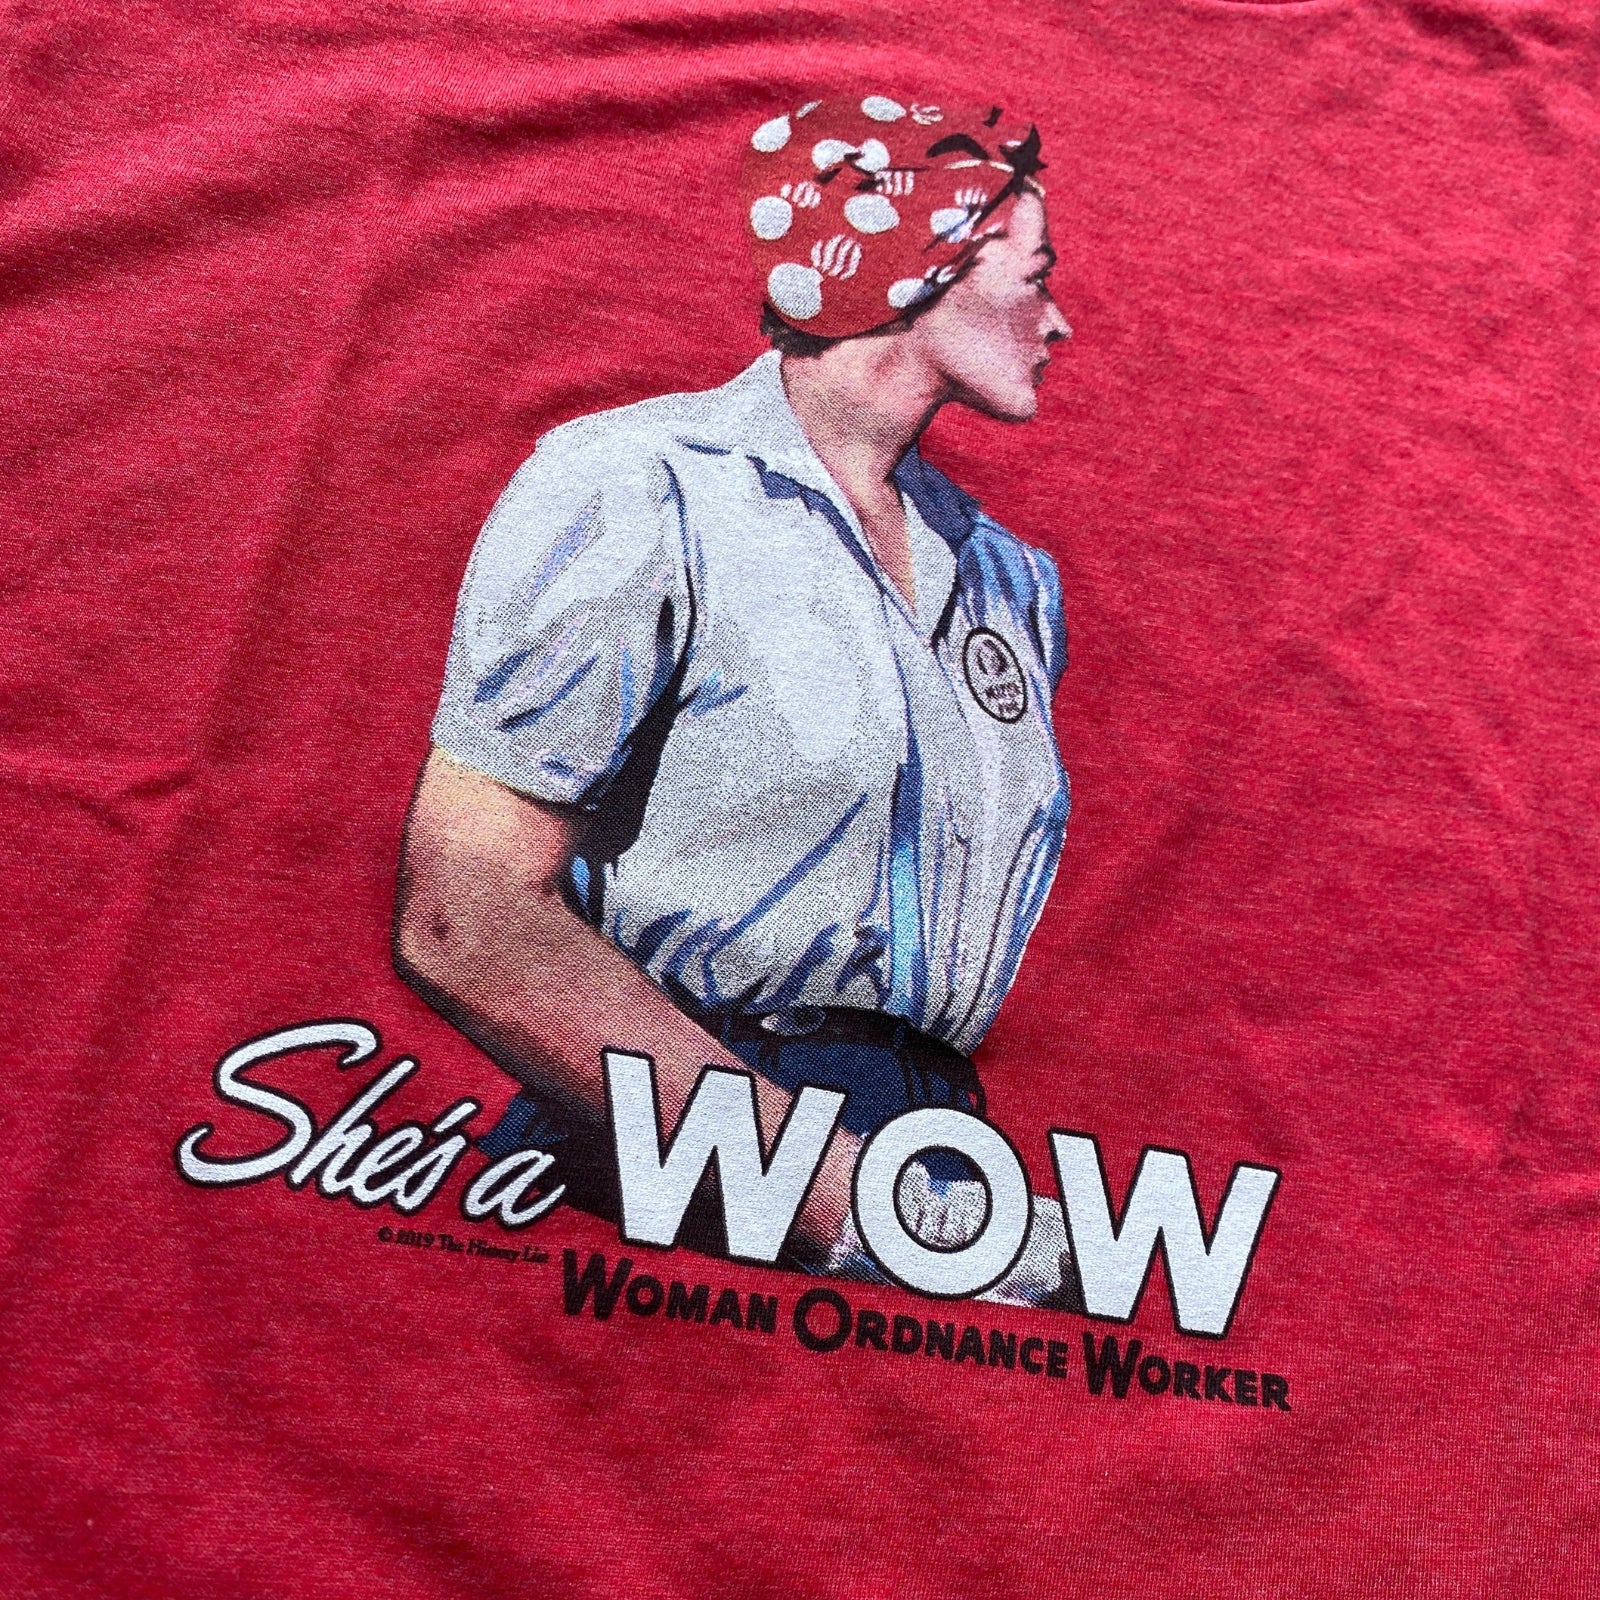 Close-up of "She's a W.O.W." Shirt from The History List store